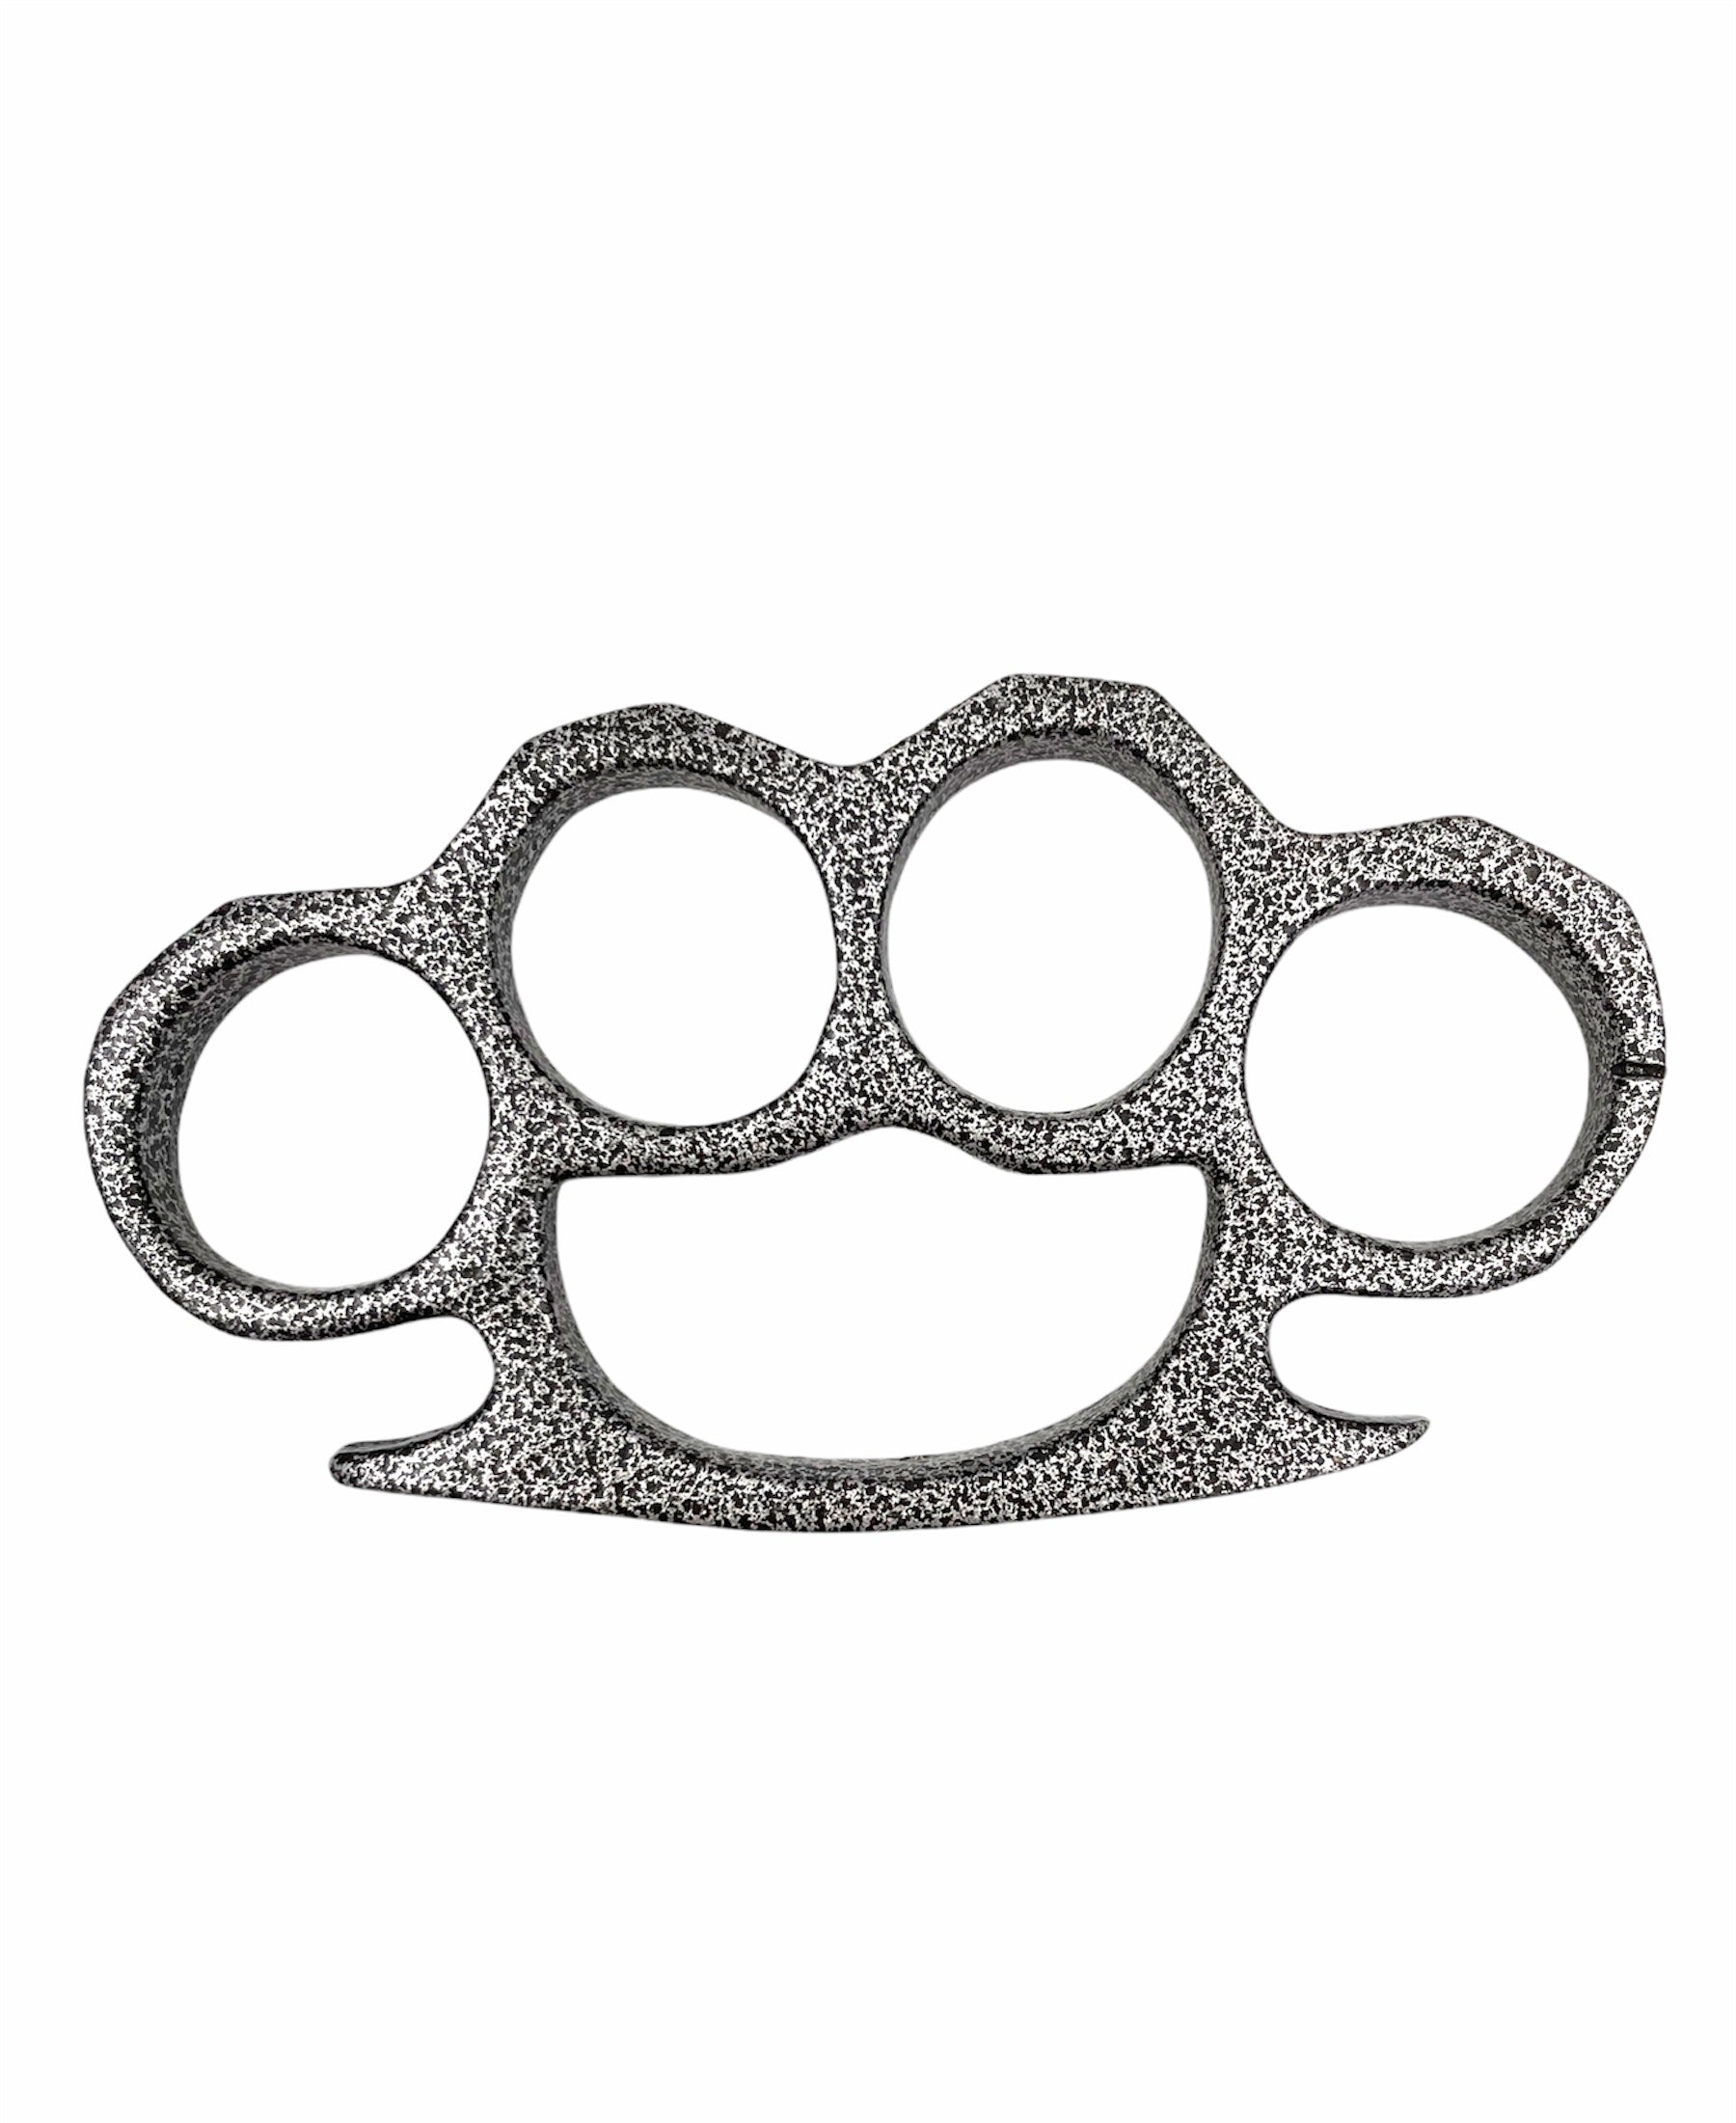 Knuckle Duster Photos, Images and Pictures